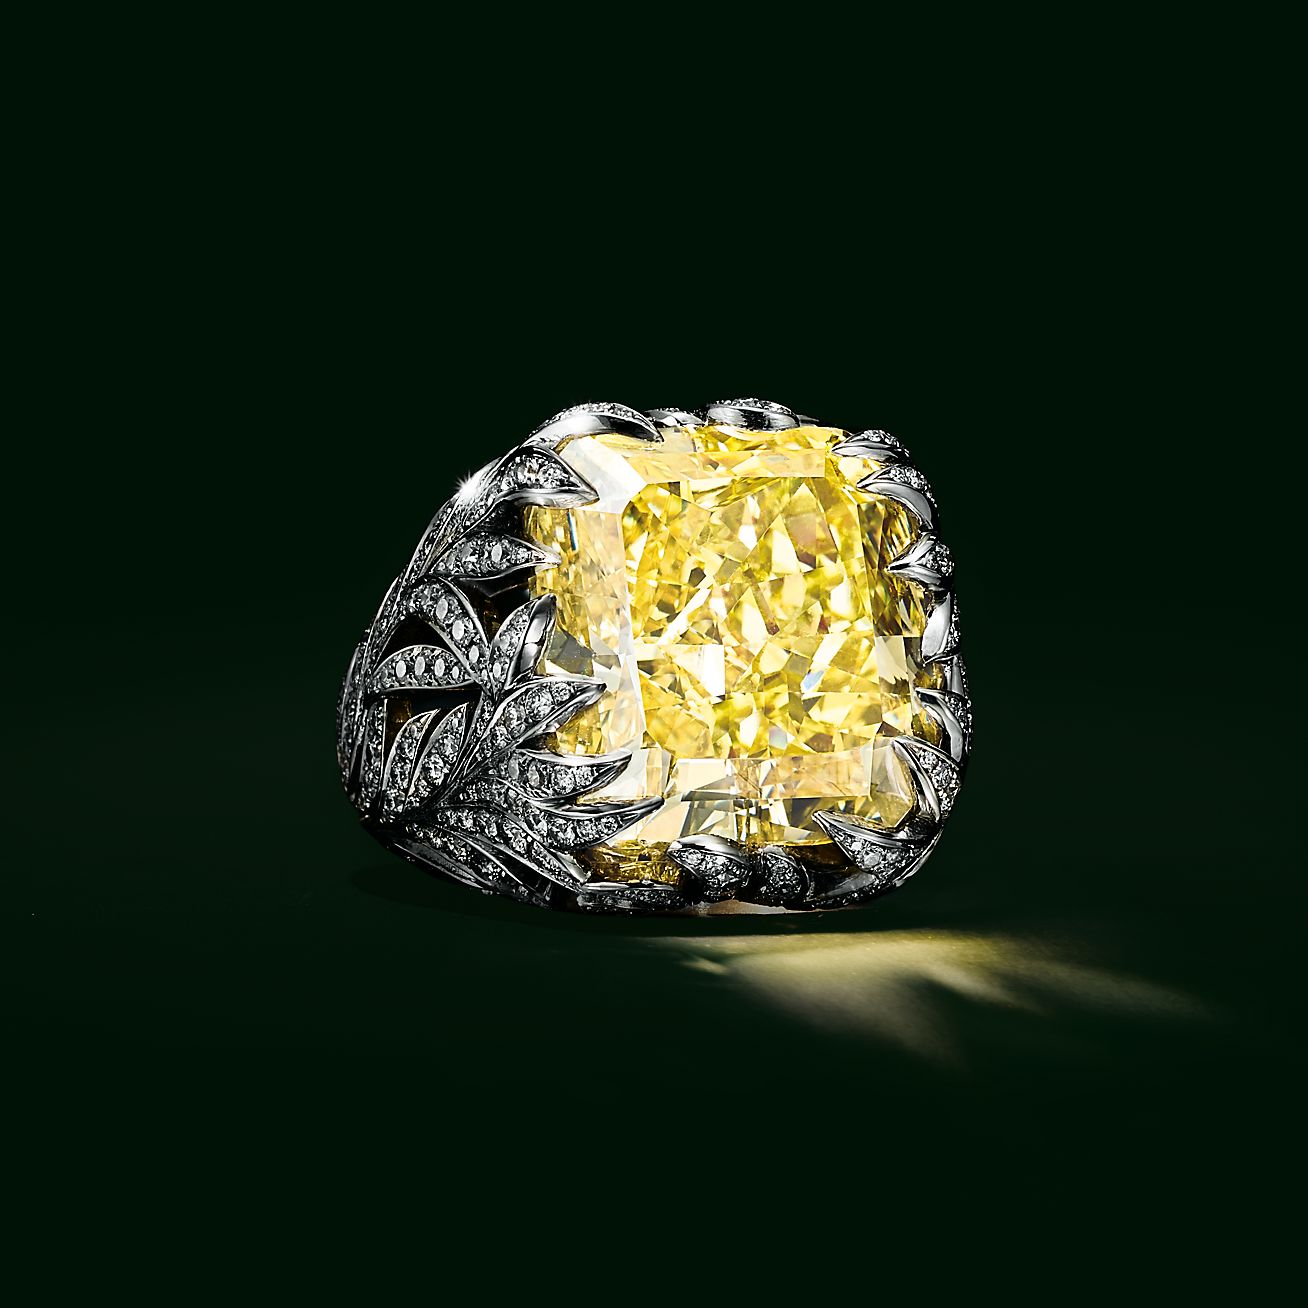 Leaves of the Sun ring in platinum and 18k gold with a fancy